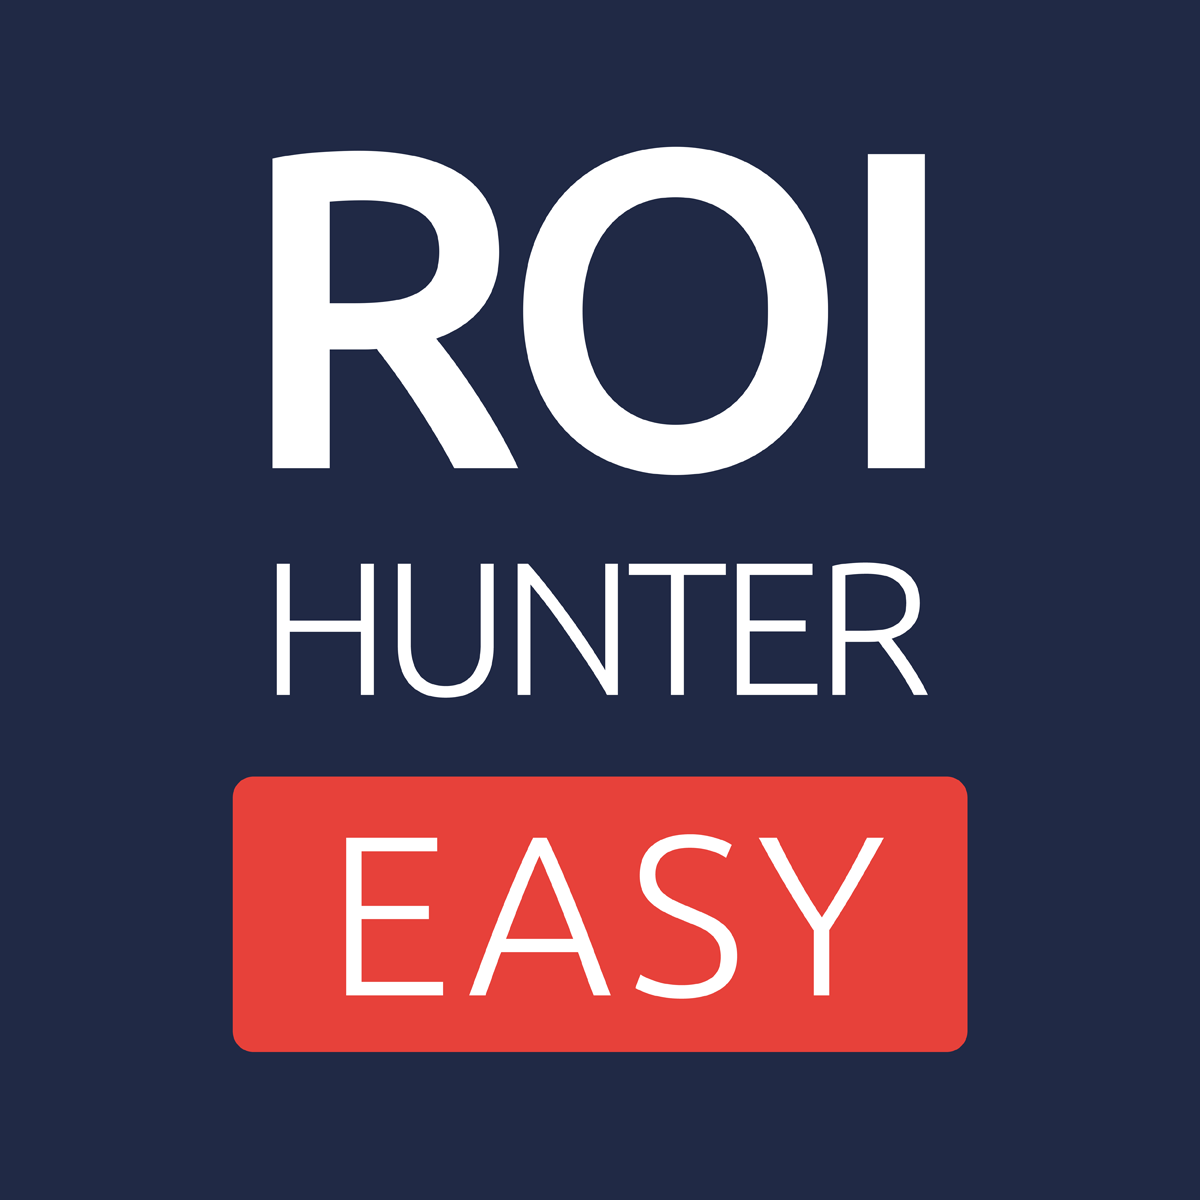 Shopify Facebook Ads Apps by Roi hunter